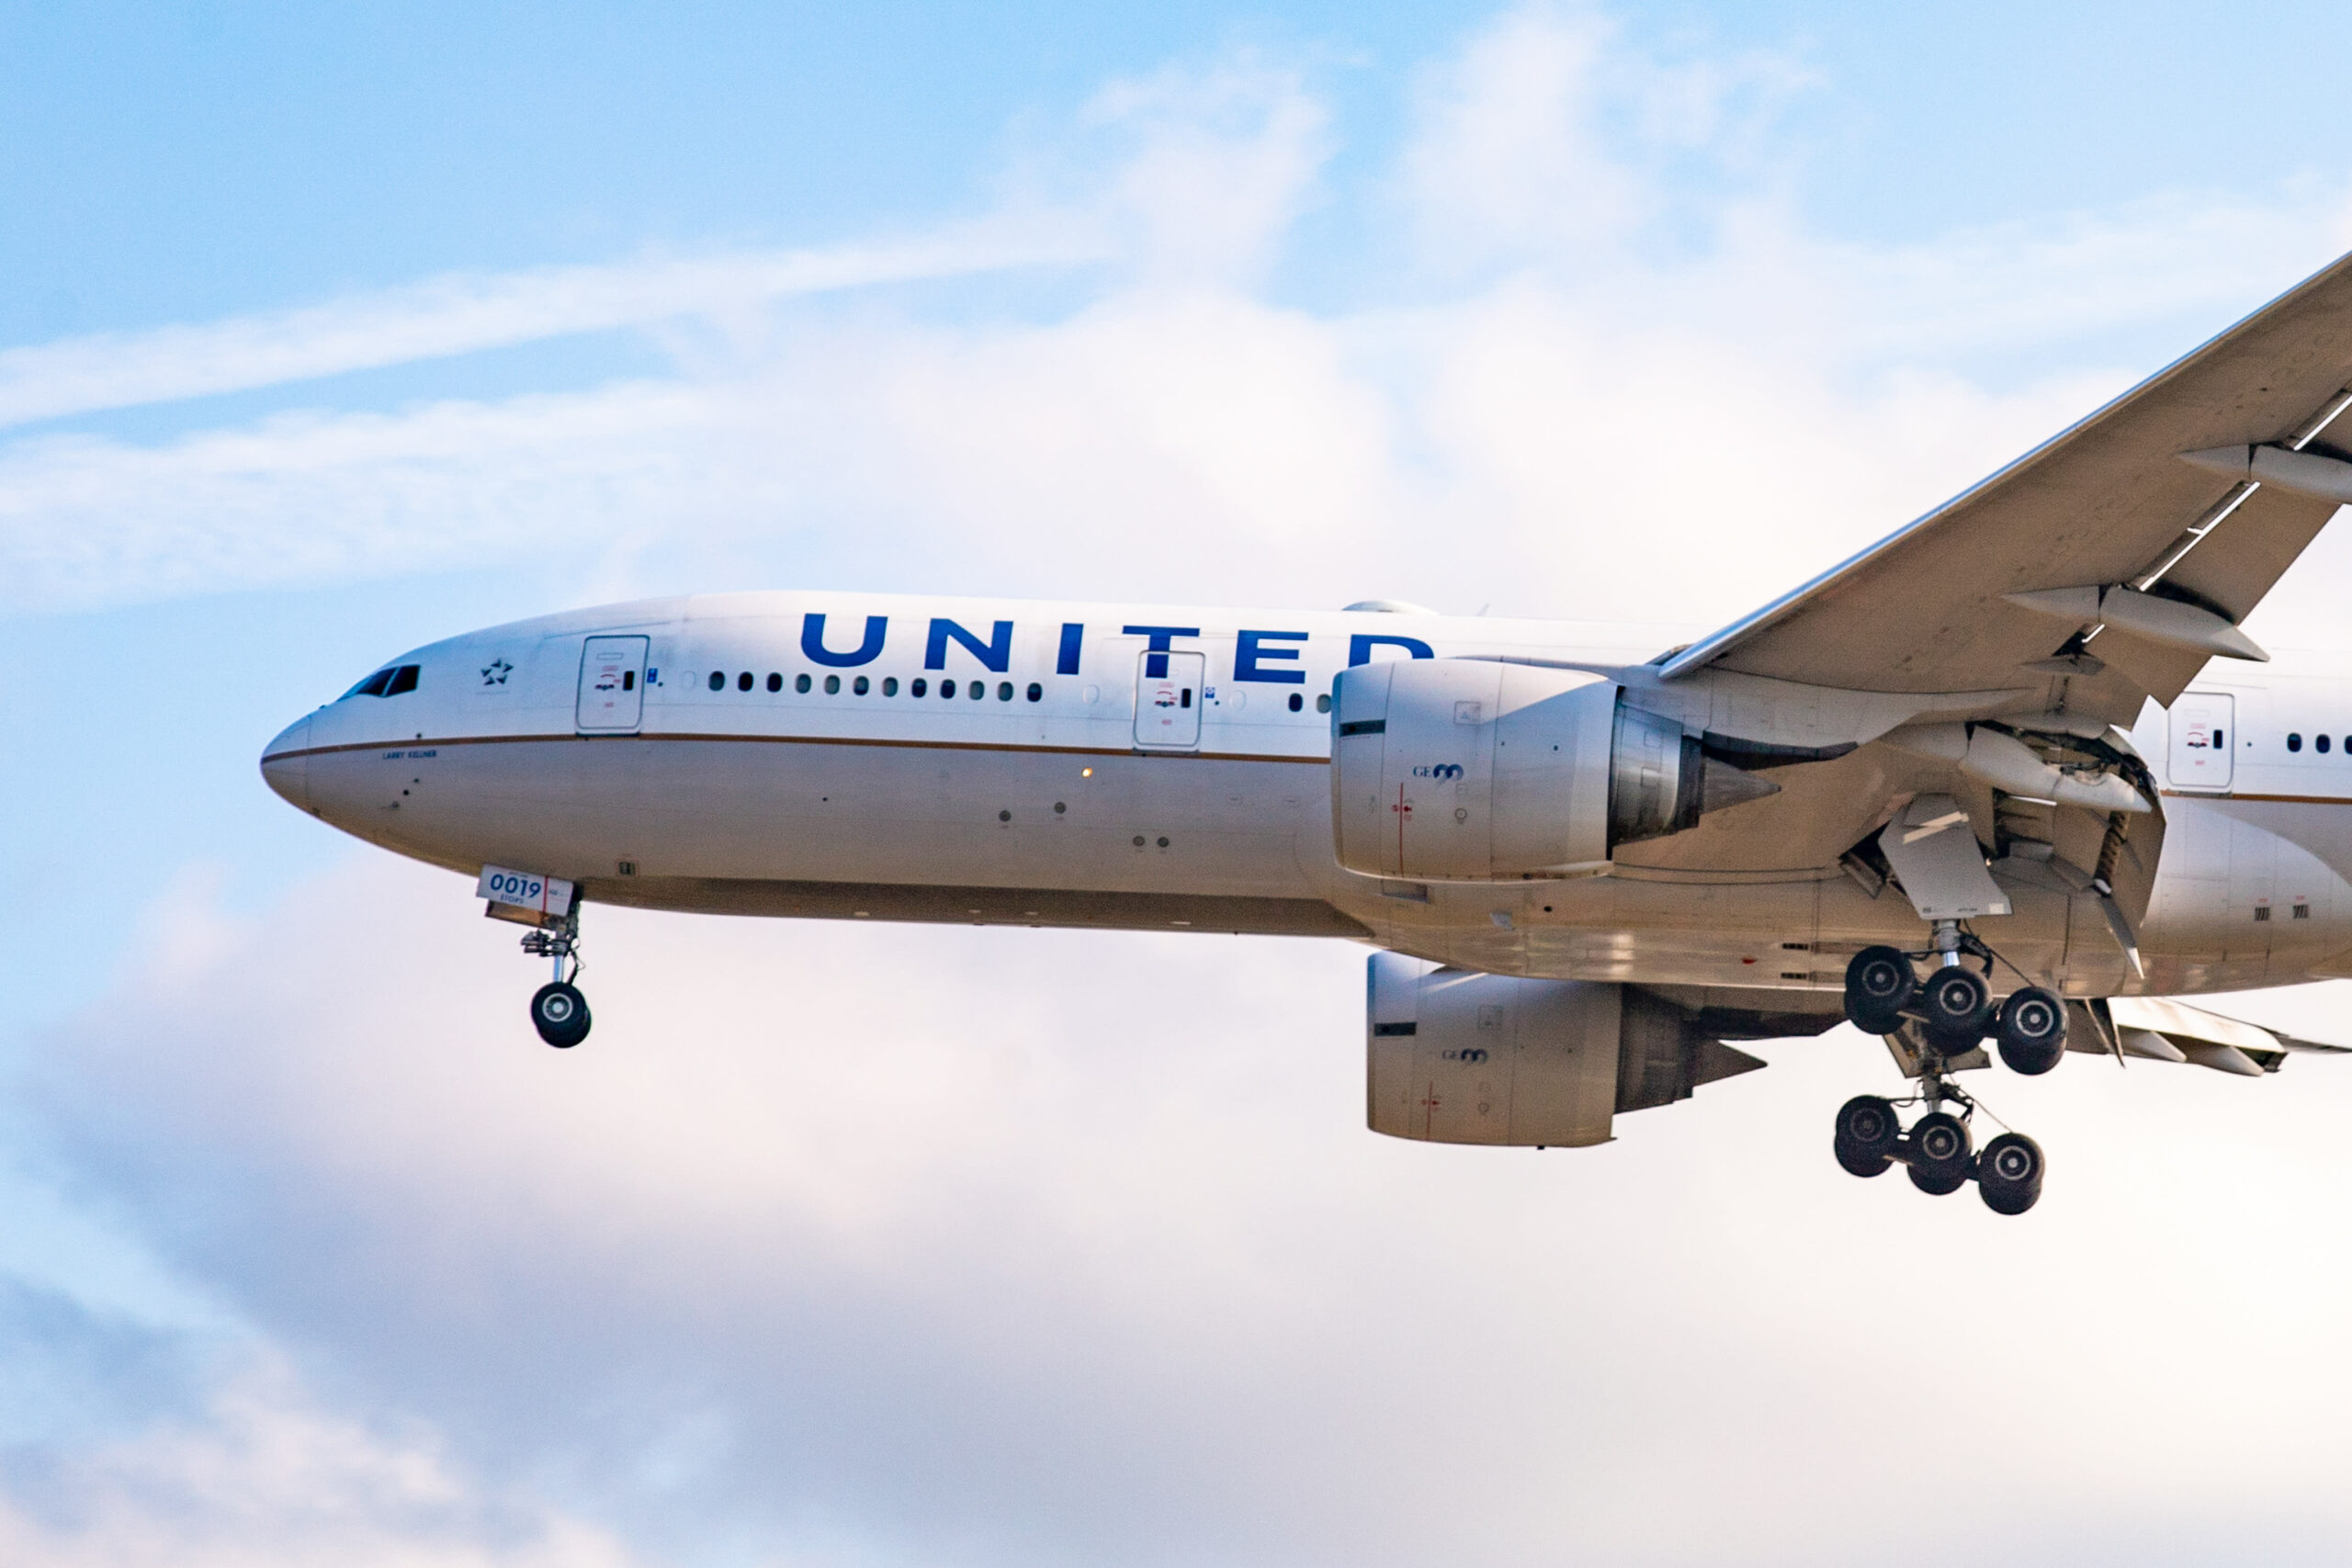 United, pilots union reach agreements for early retirements and voluntary furloughs